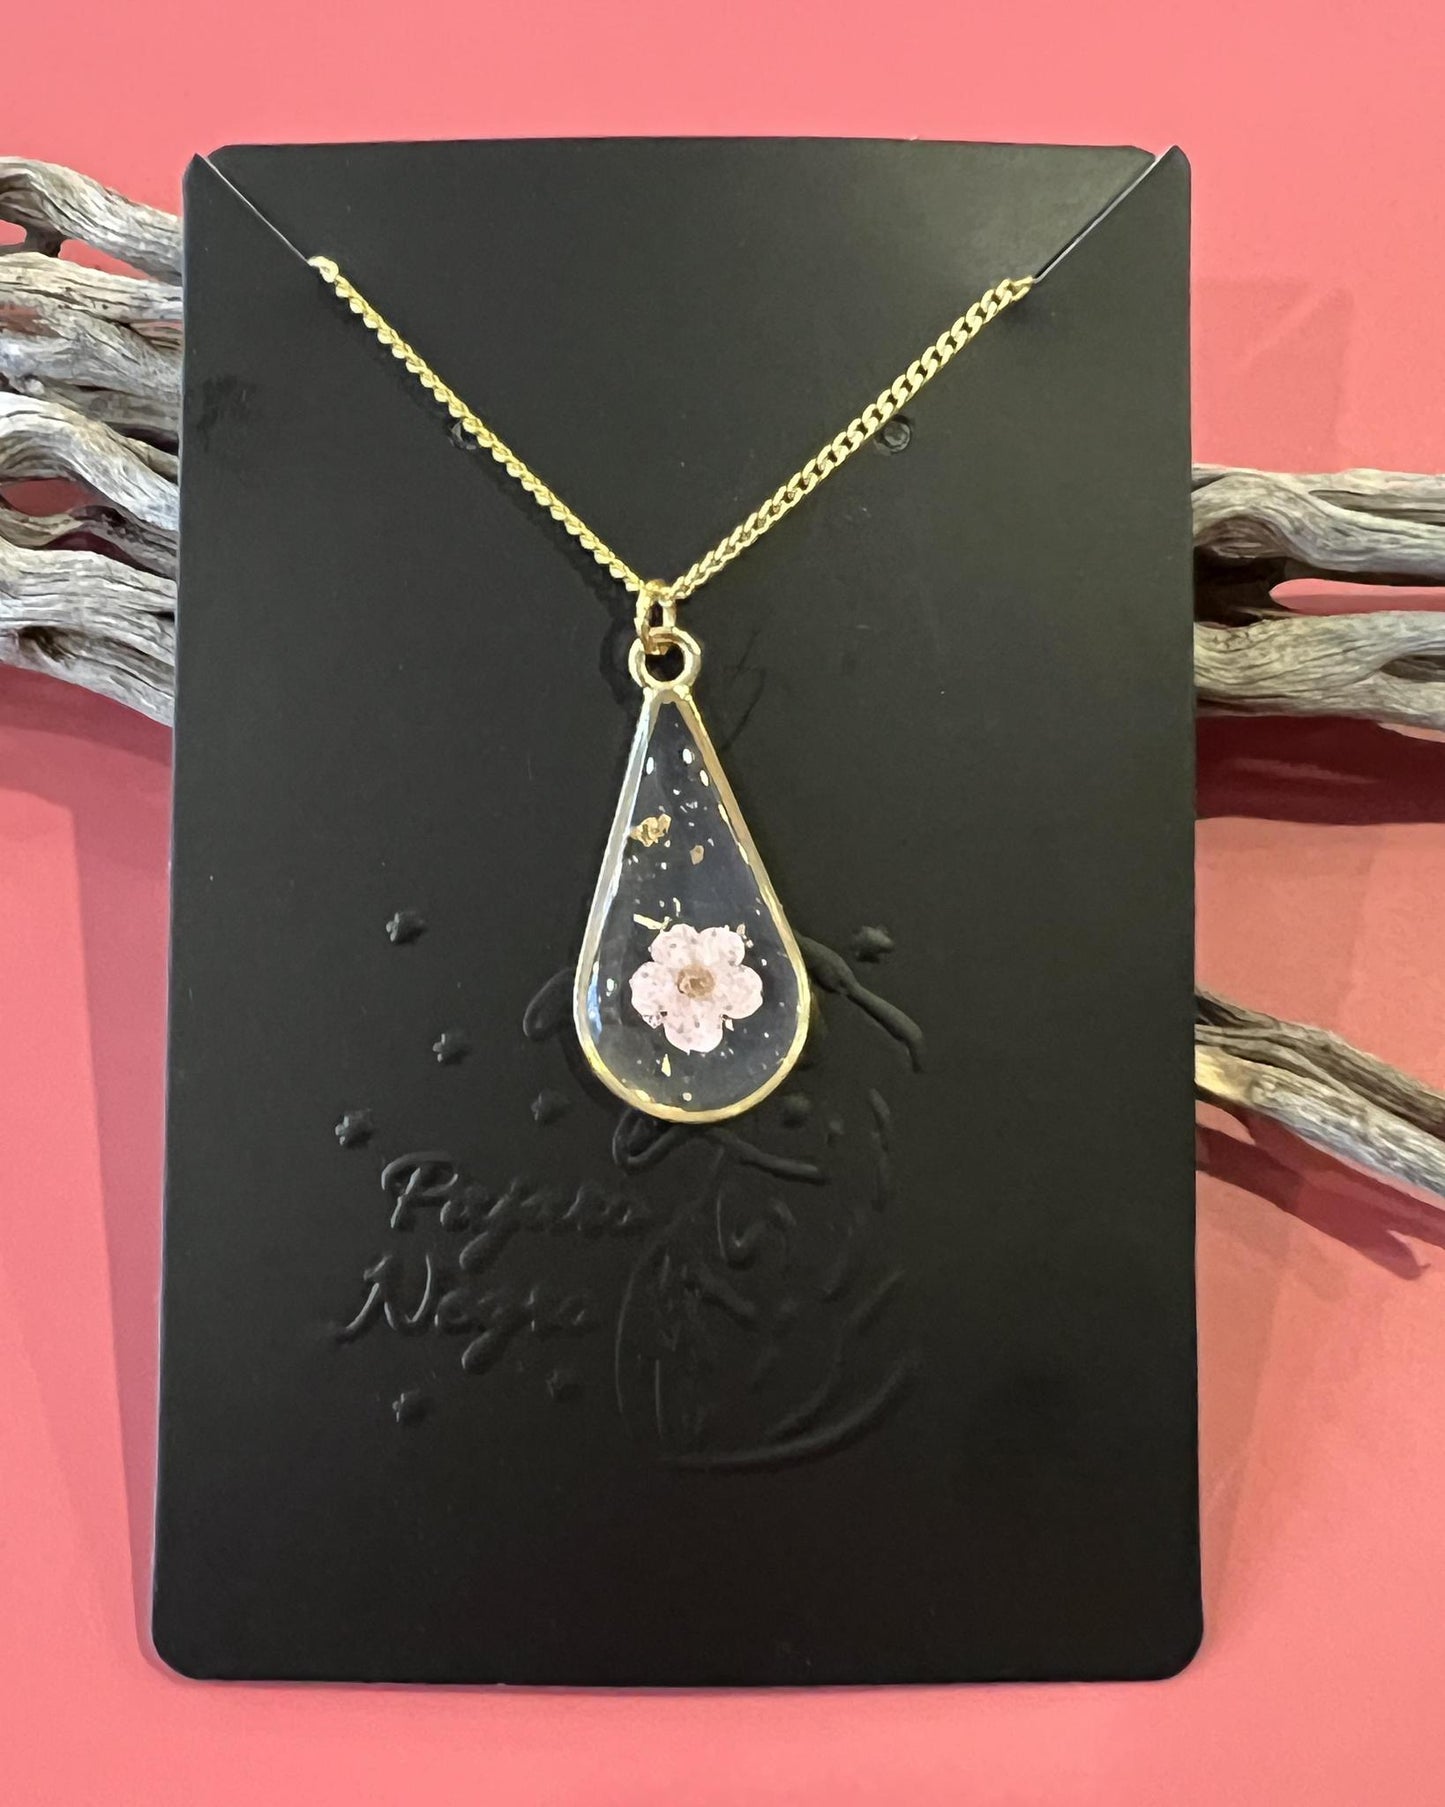 Pajaro Negro 18K Gold Fill Teardrop Pendant Necklace with Tiny Pink Flower